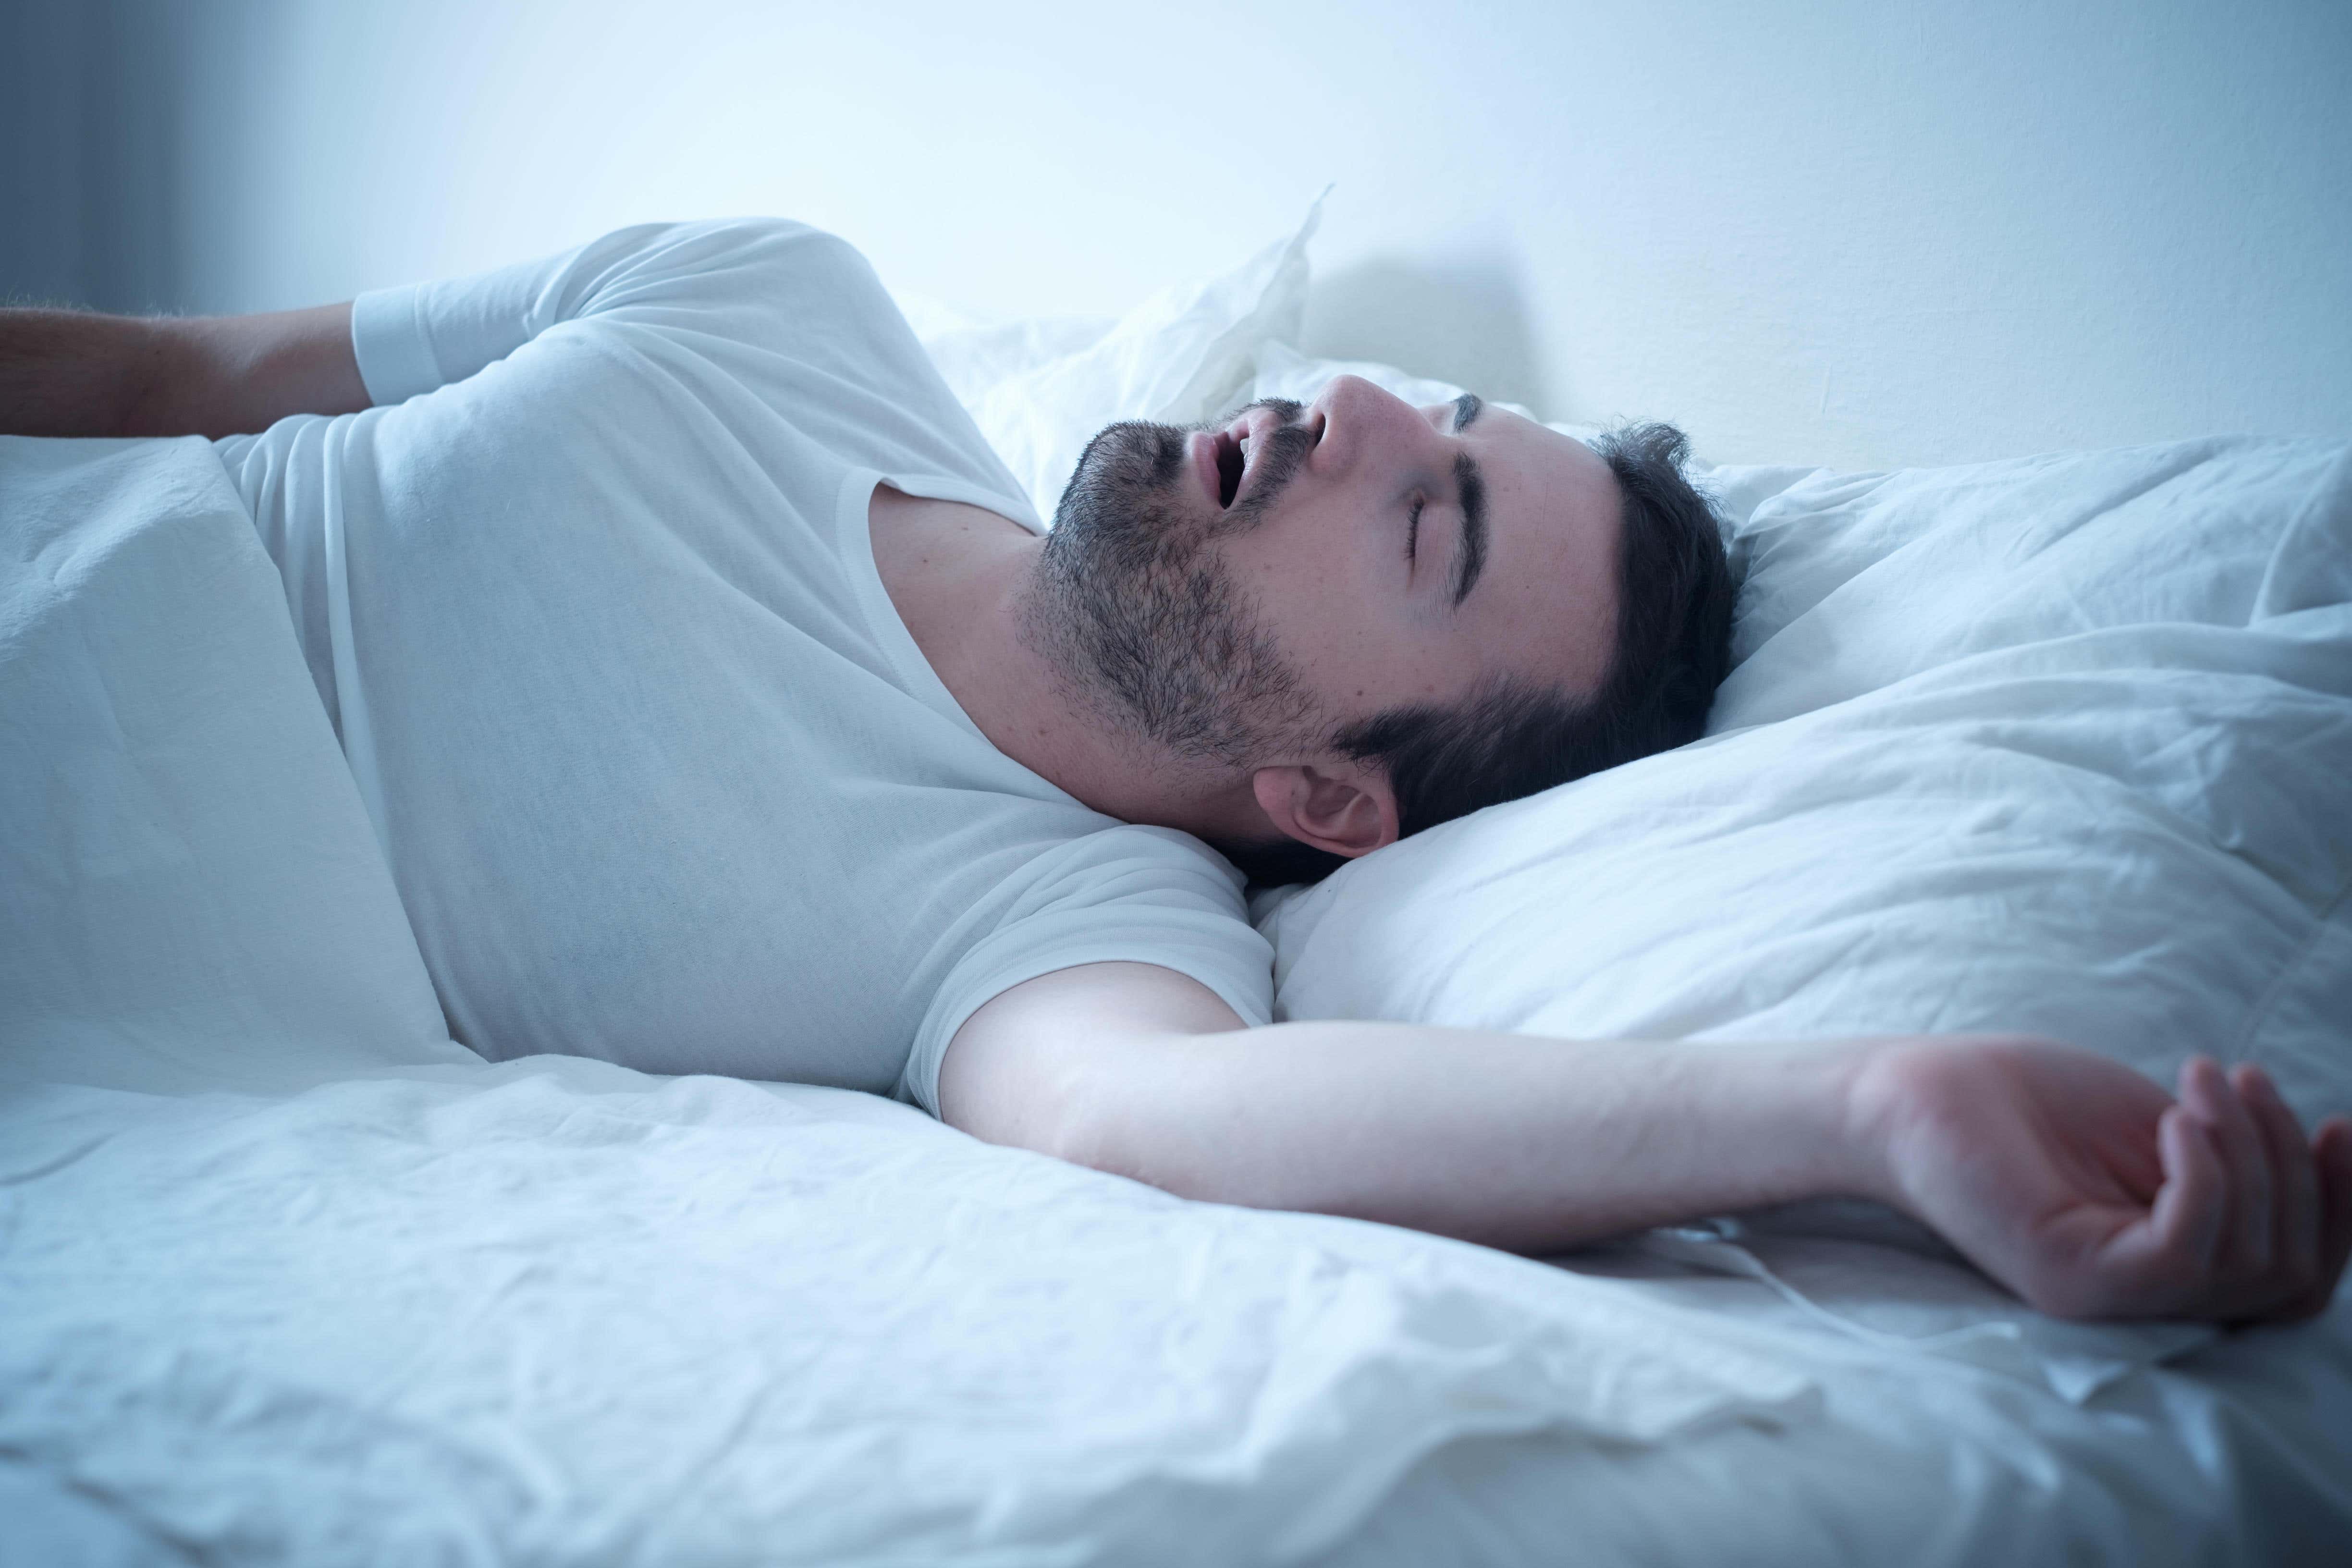 Snoring increases your stroke risk